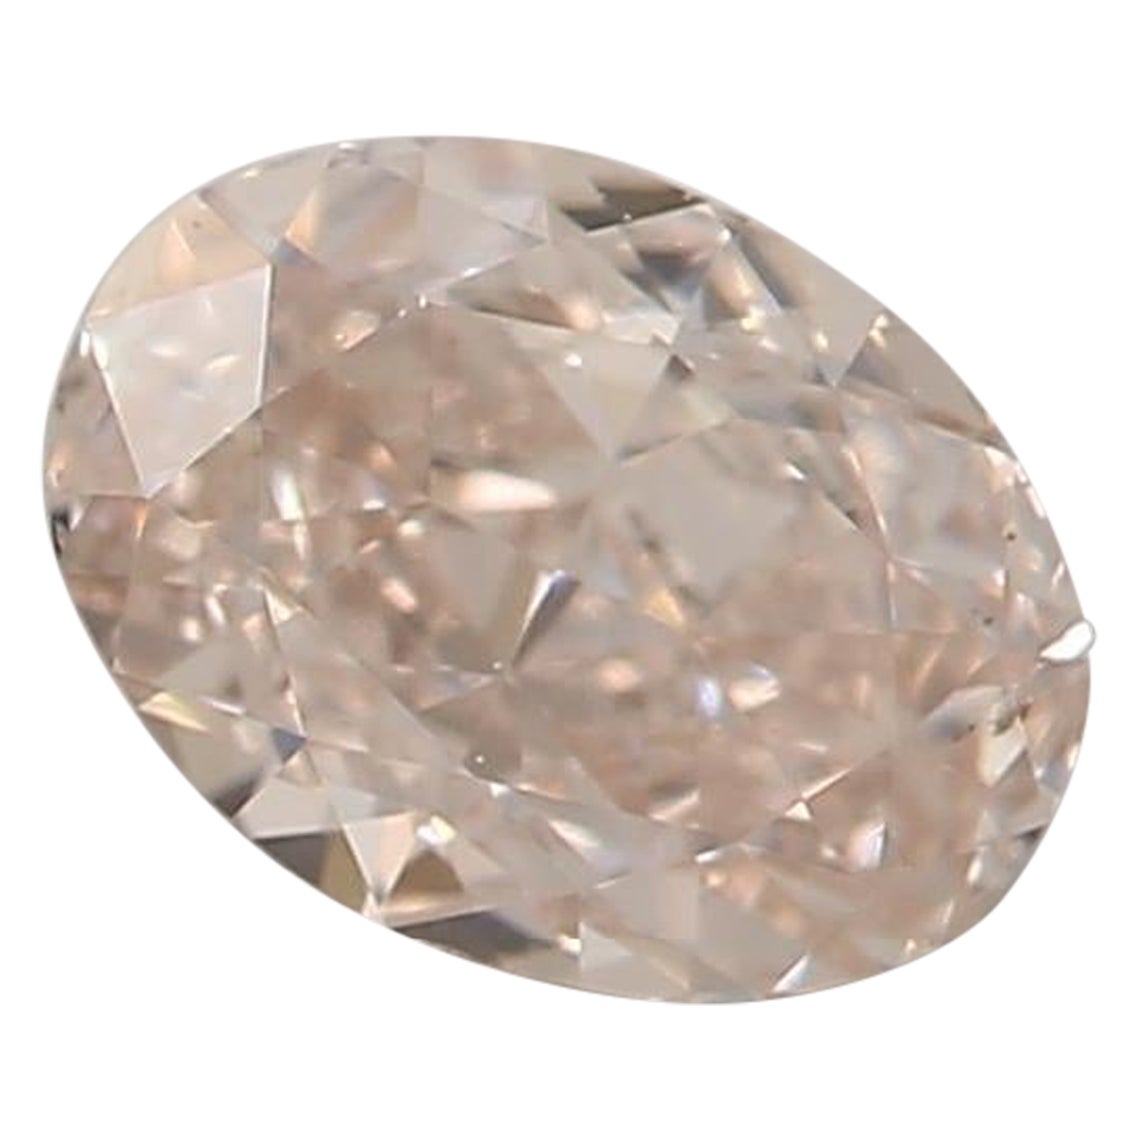 0.42 Carat Light Pink Brown Oval Cut Diamond SI2 Clarity GIA Certified For Sale